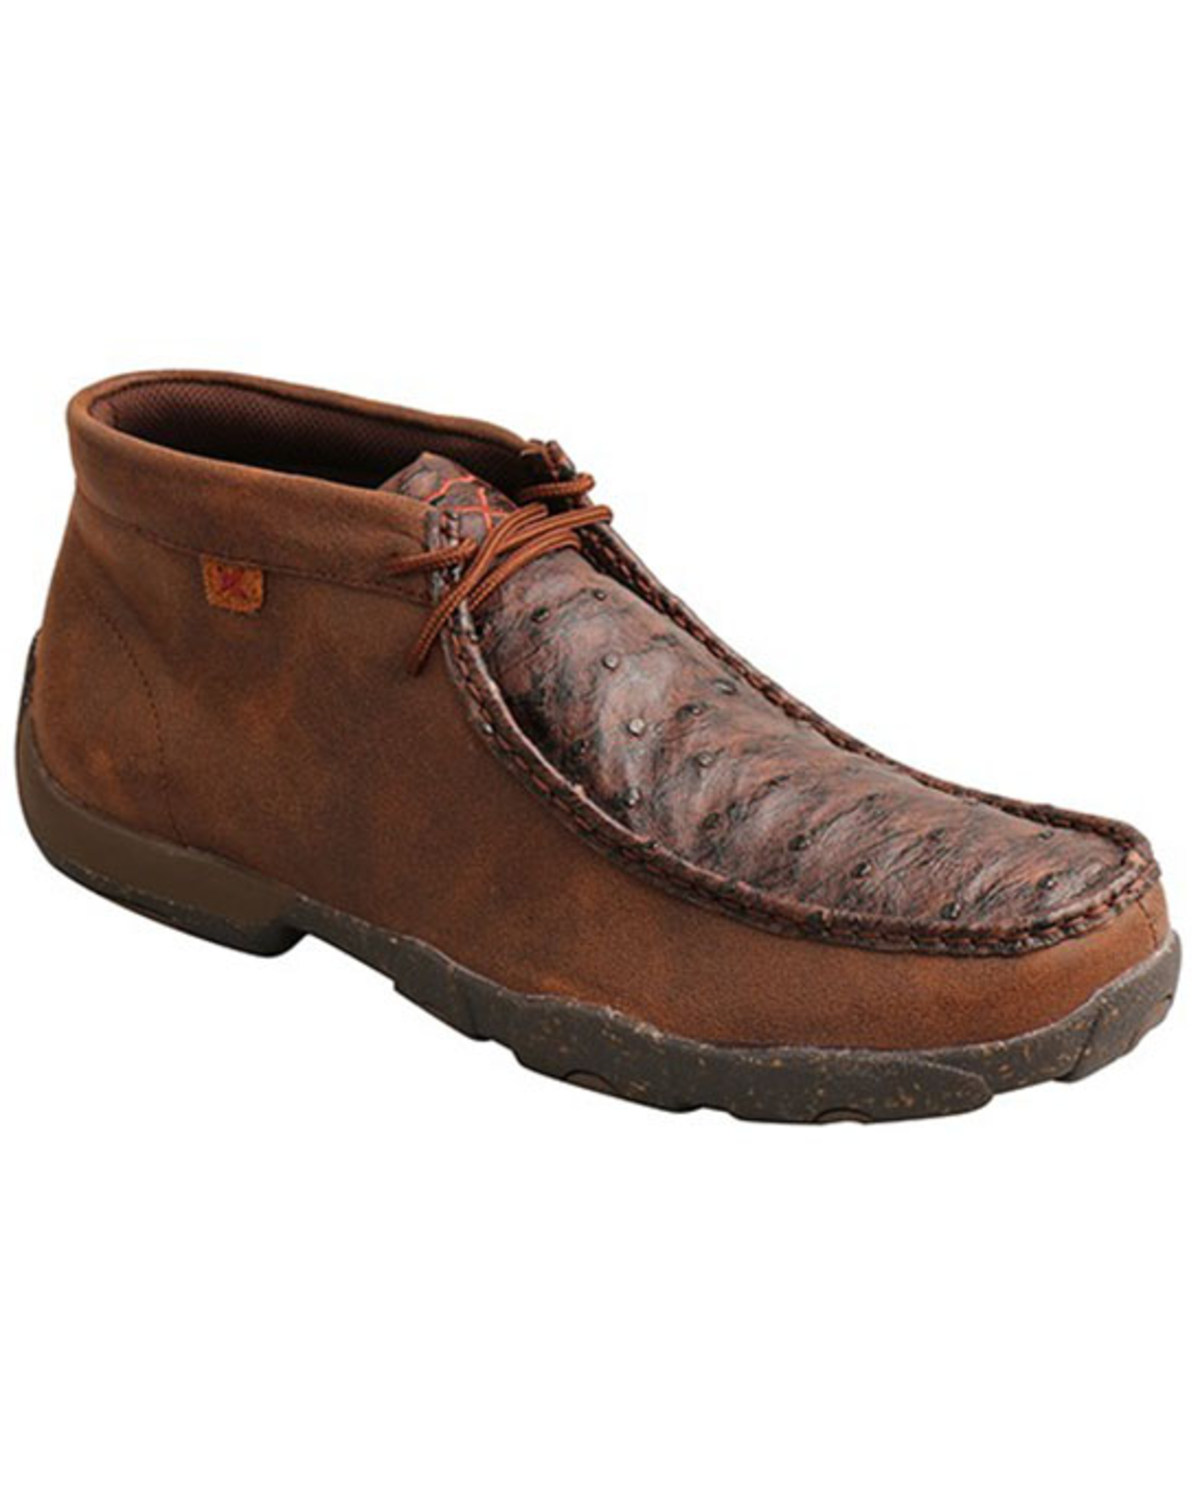 Twisted X Men's Ostrich Chukka Shoes - Moc Toe